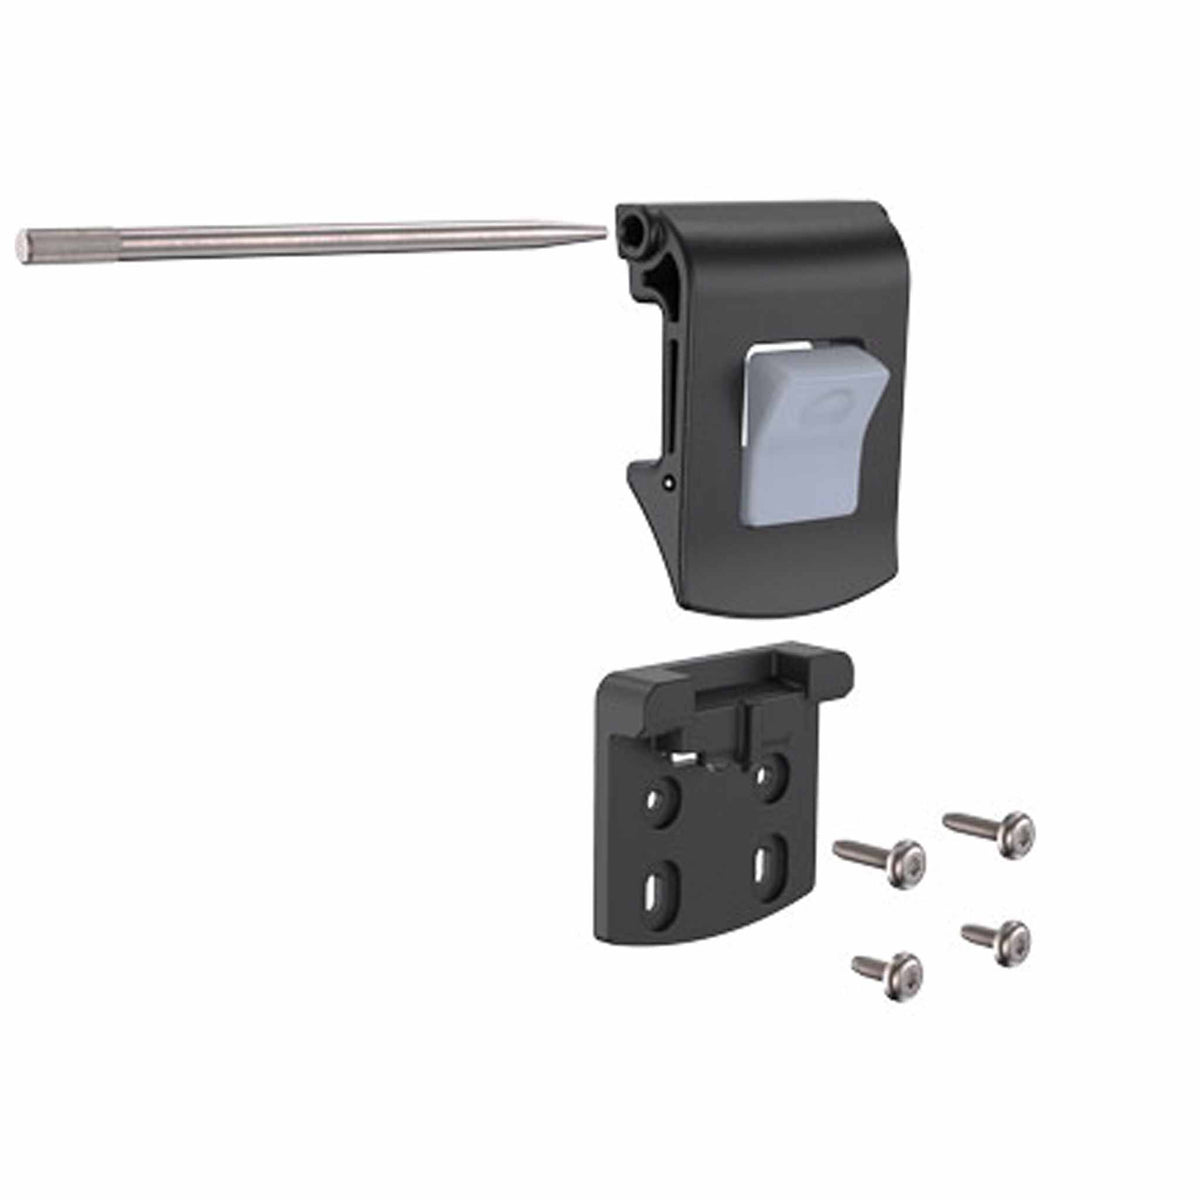 Replacement Roto Pin &amp; Screw Latch in grey